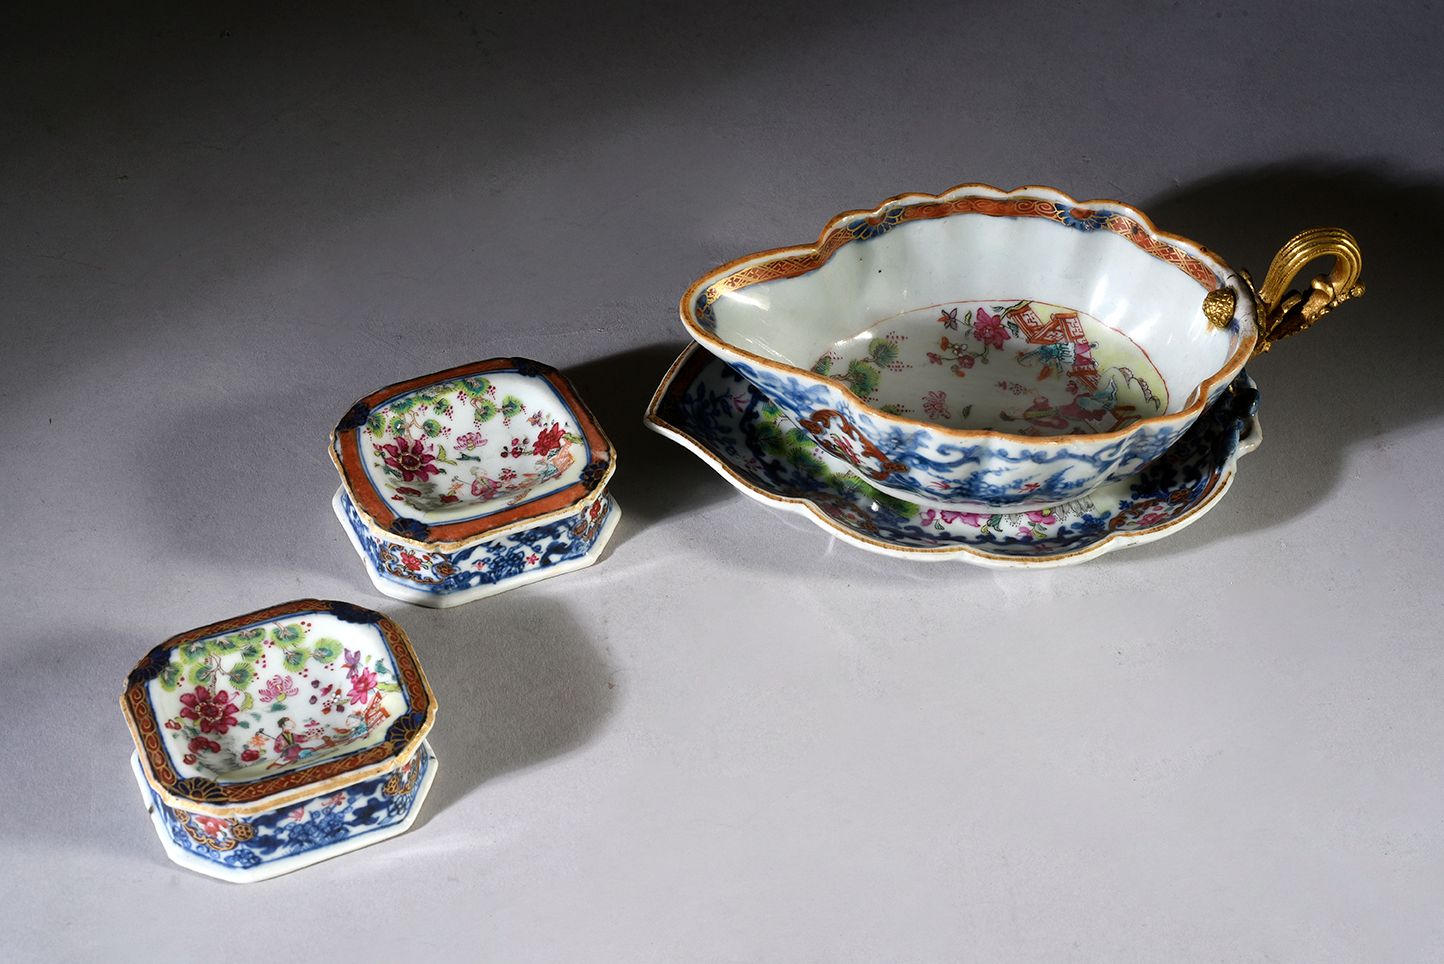 Null Set of Chinese porcelain decorated with characters in frames of foliage:
-W&hellip;